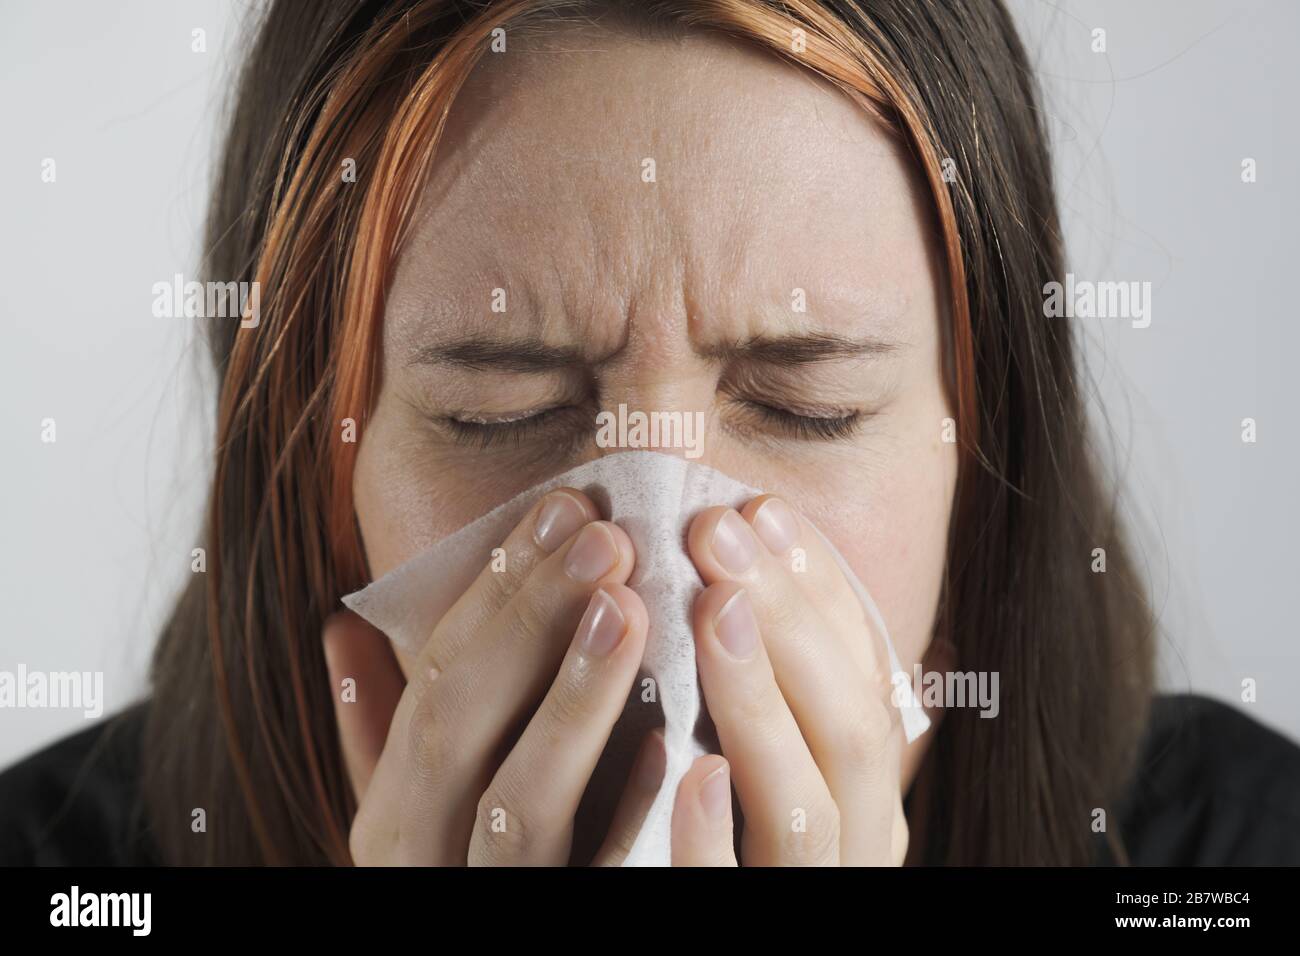 Sneezing, coughing or blowing nose in a single use paper towl. Concept of catching cold, virus or infection and not spreading it Stock Photo